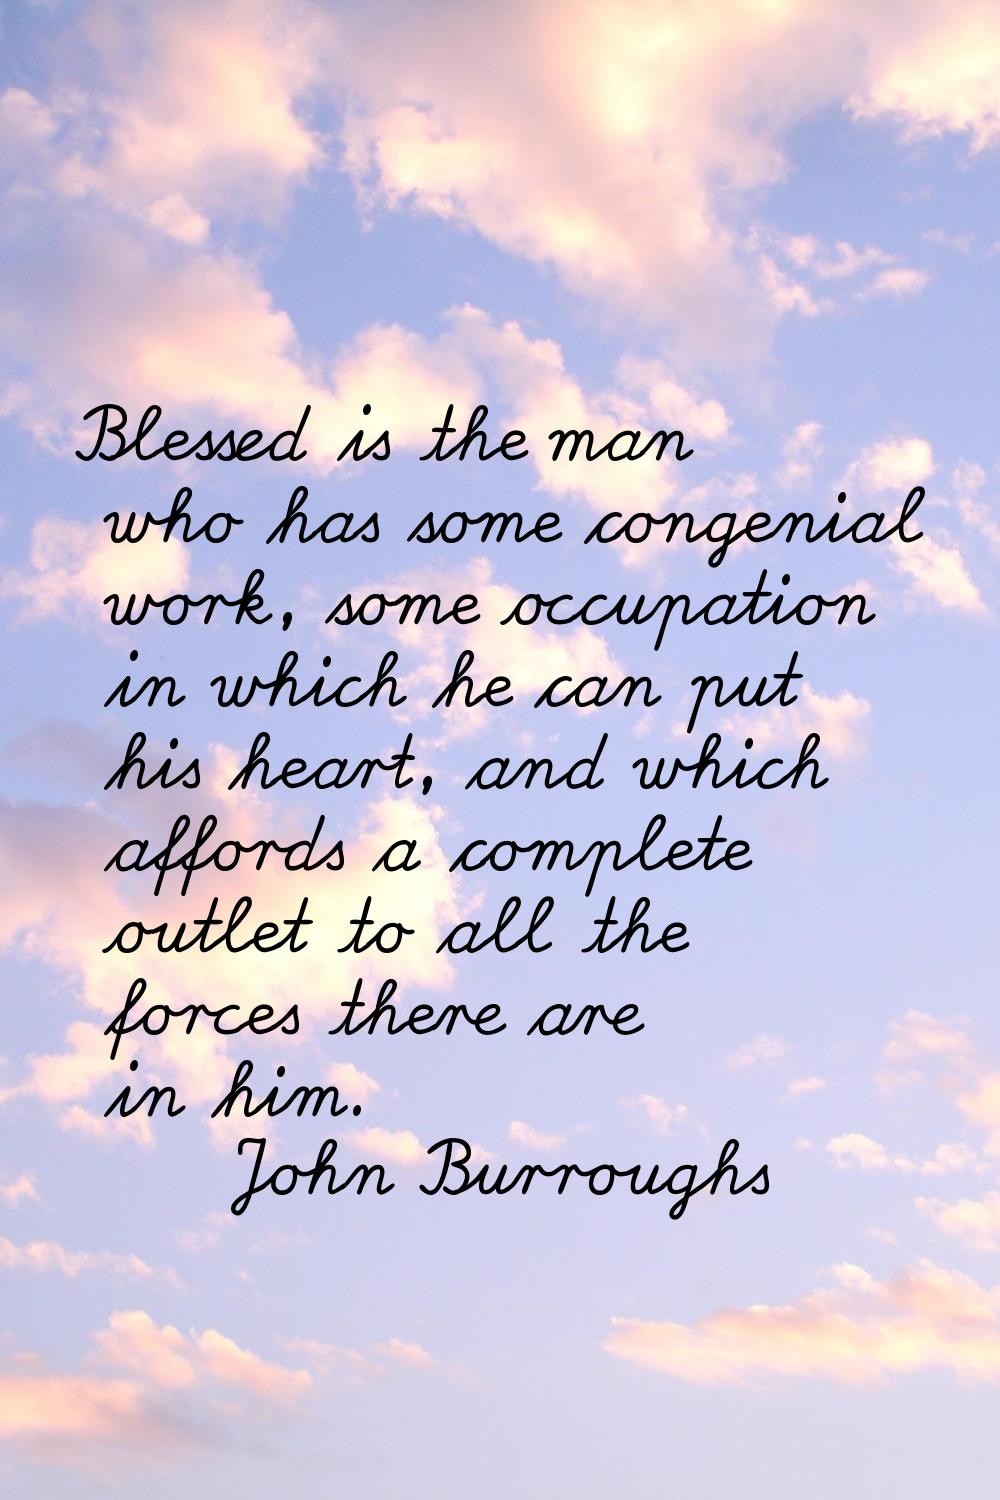 Blessed is the man who has some congenial work, some occupation in which he can put his heart, and 